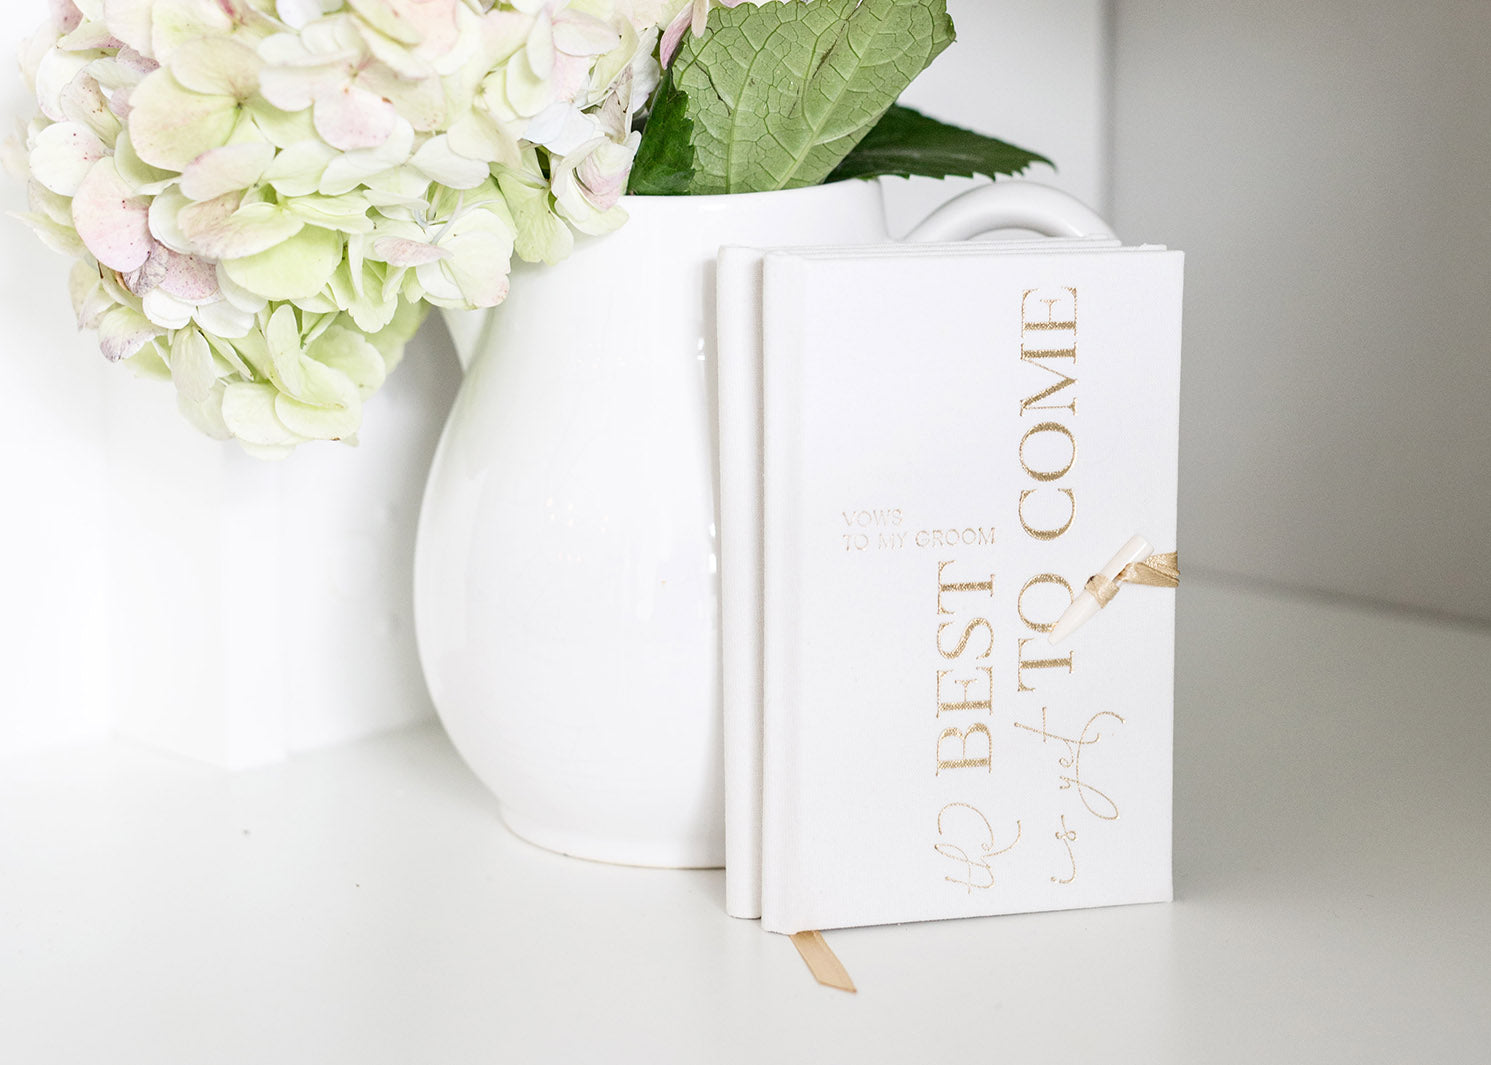 4 Keepsakes from Your Wedding That You Can Incorporate into Your Home Décor